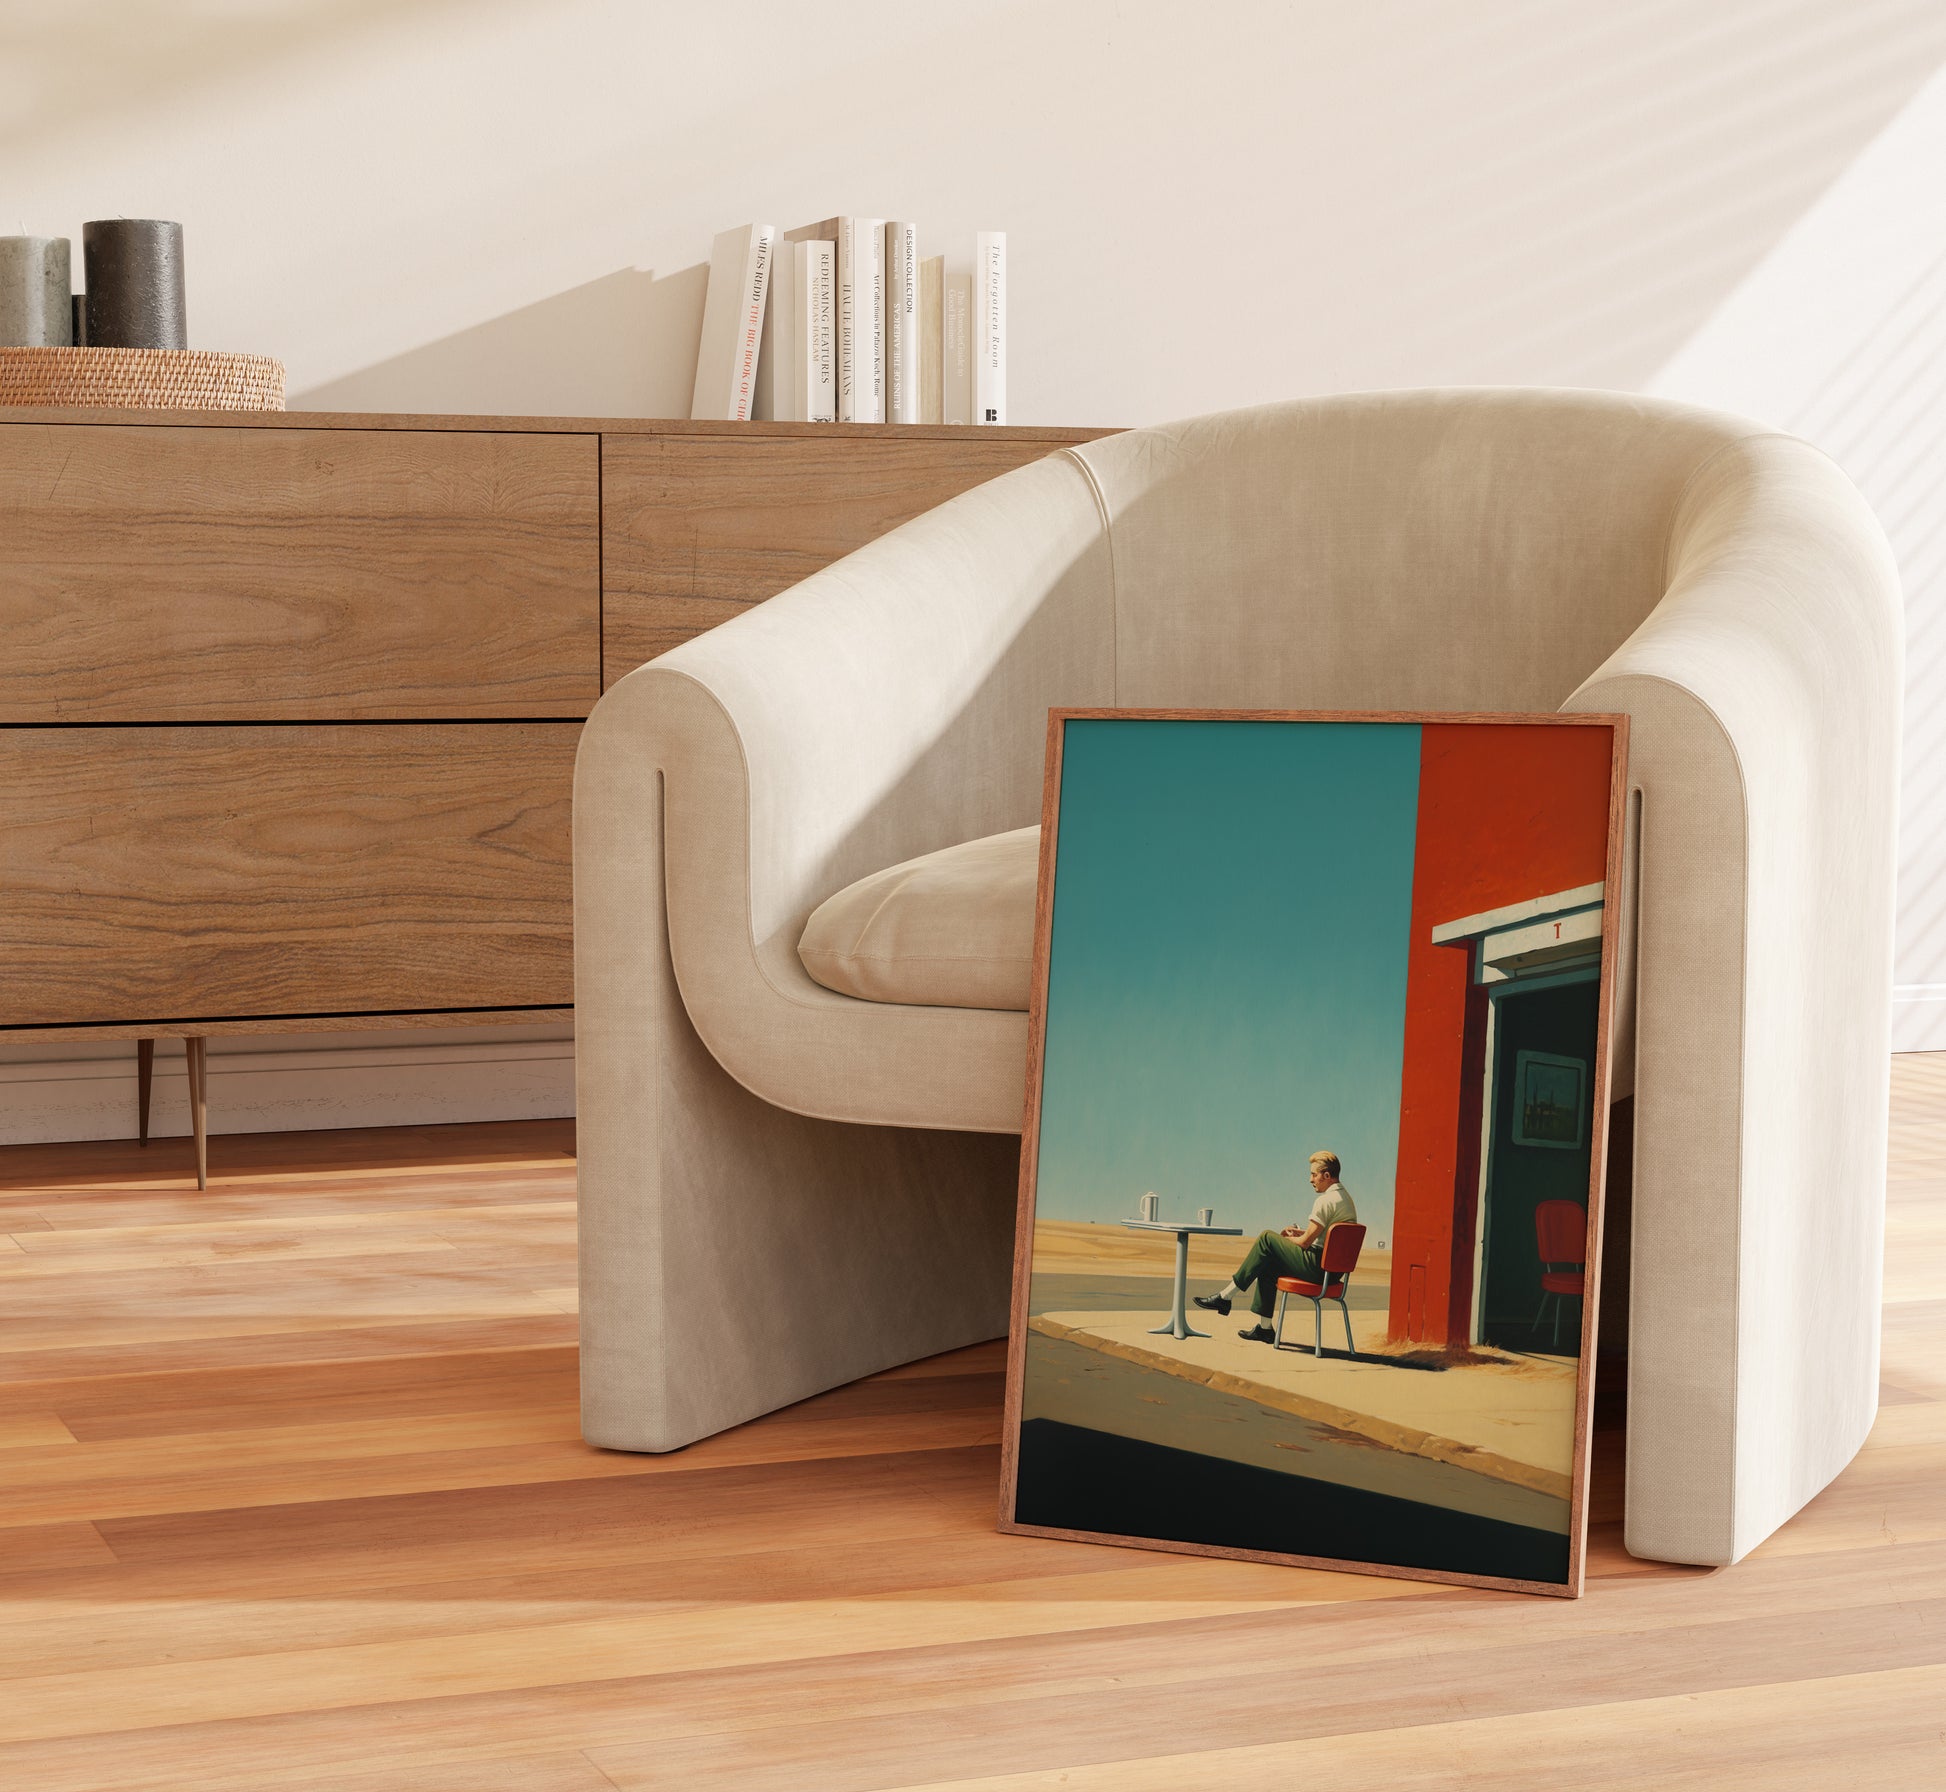 A modern beige chair with a framed picture leaning against it near a wooden cabinet.